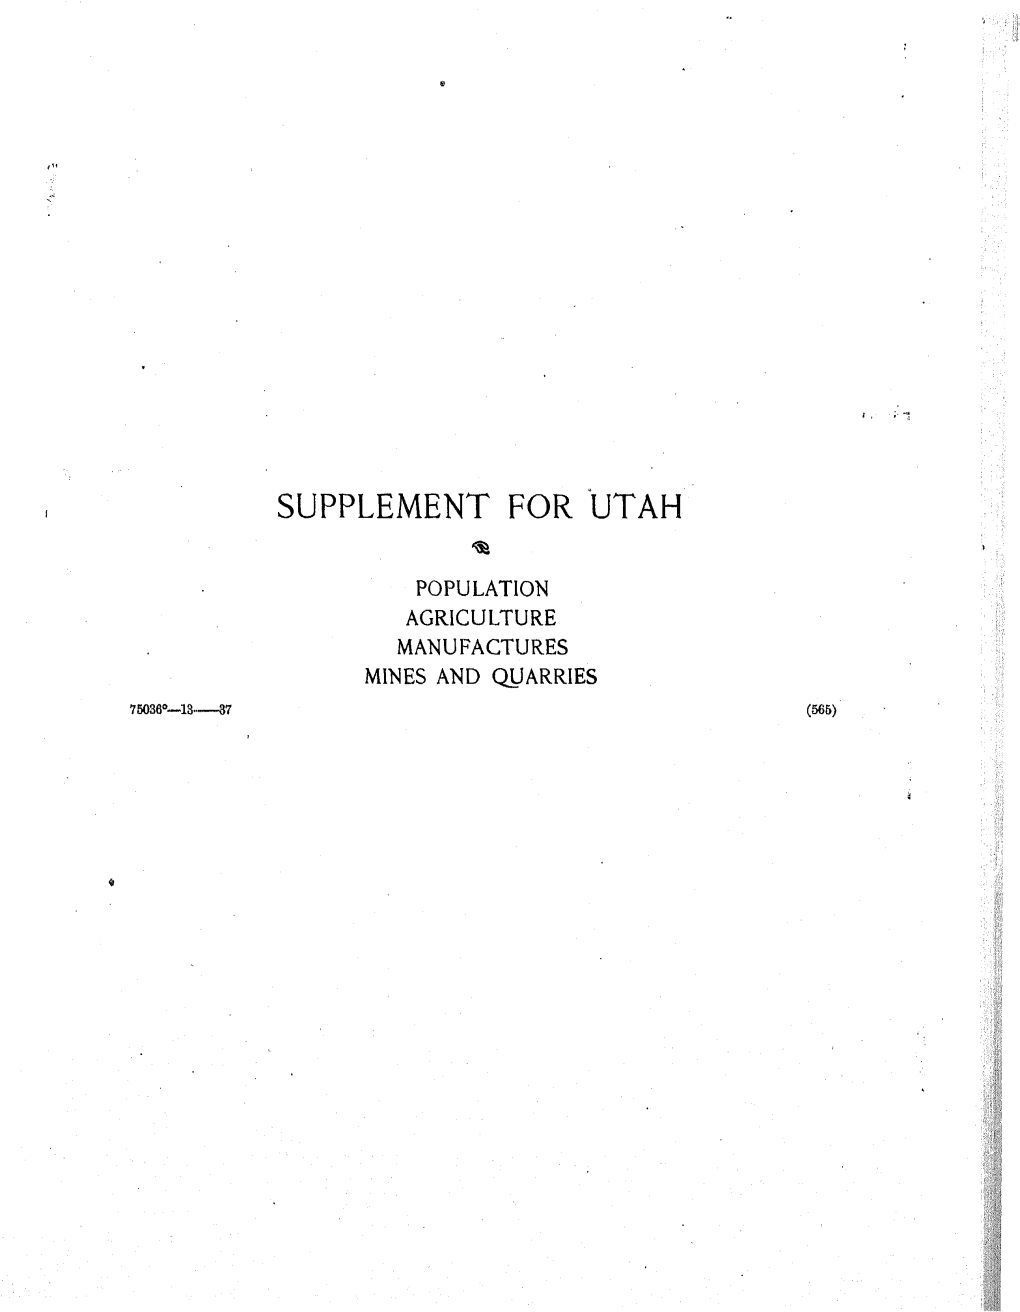 1910 Abstract – Supplement for Utah